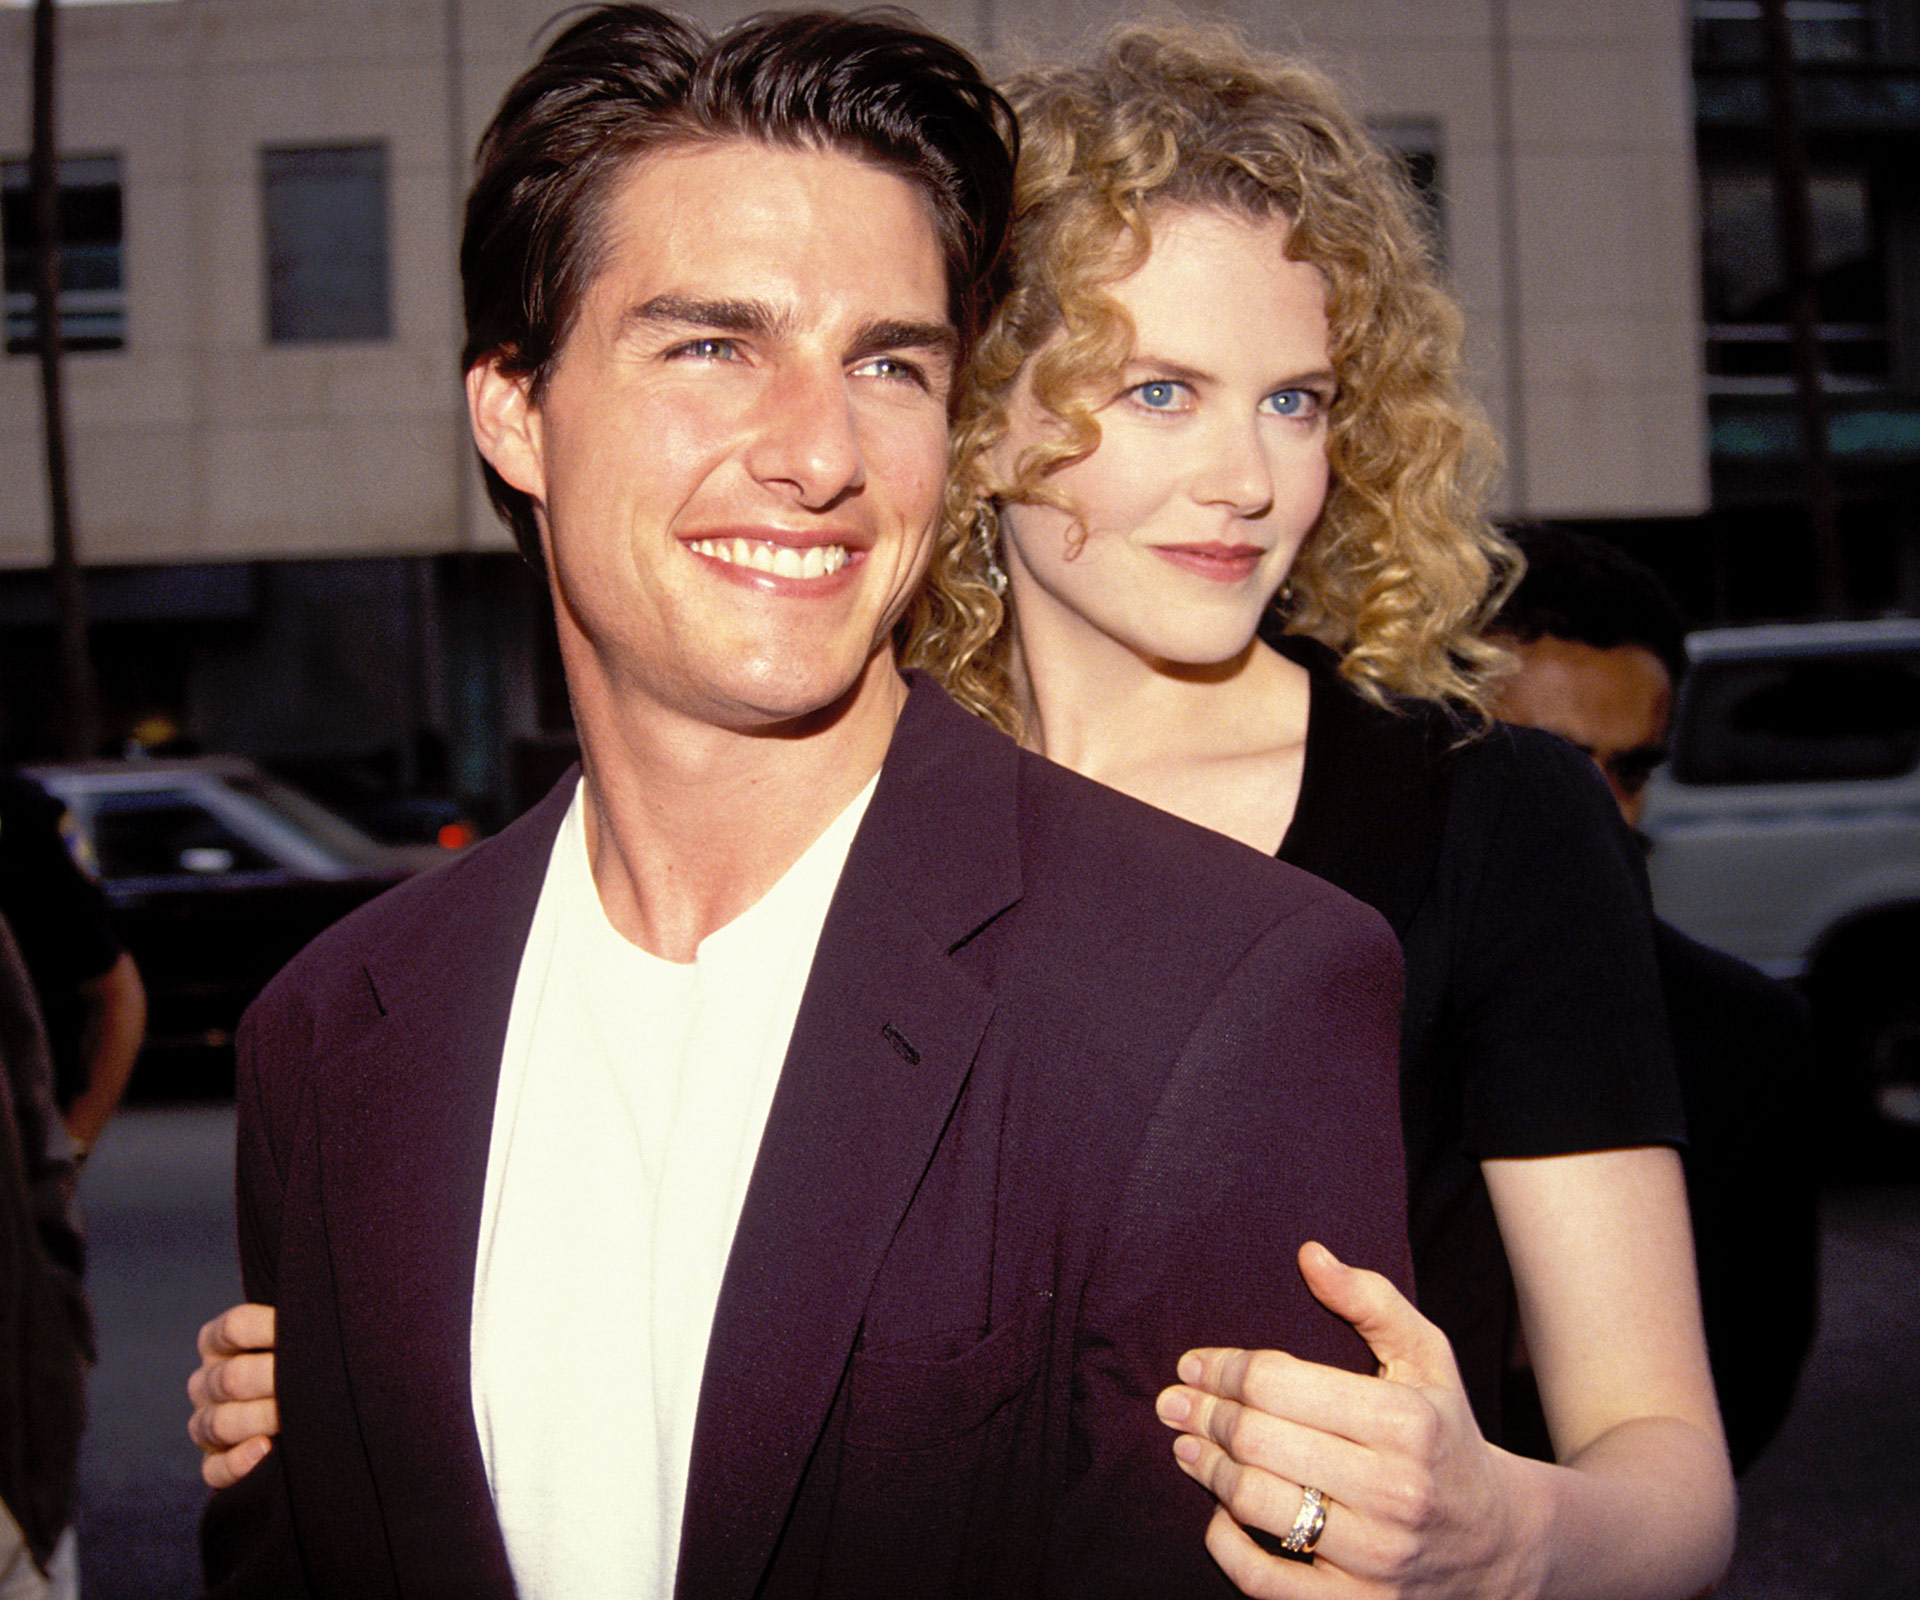 Nicole Kidman has no regrets about Tom Cruise marriage